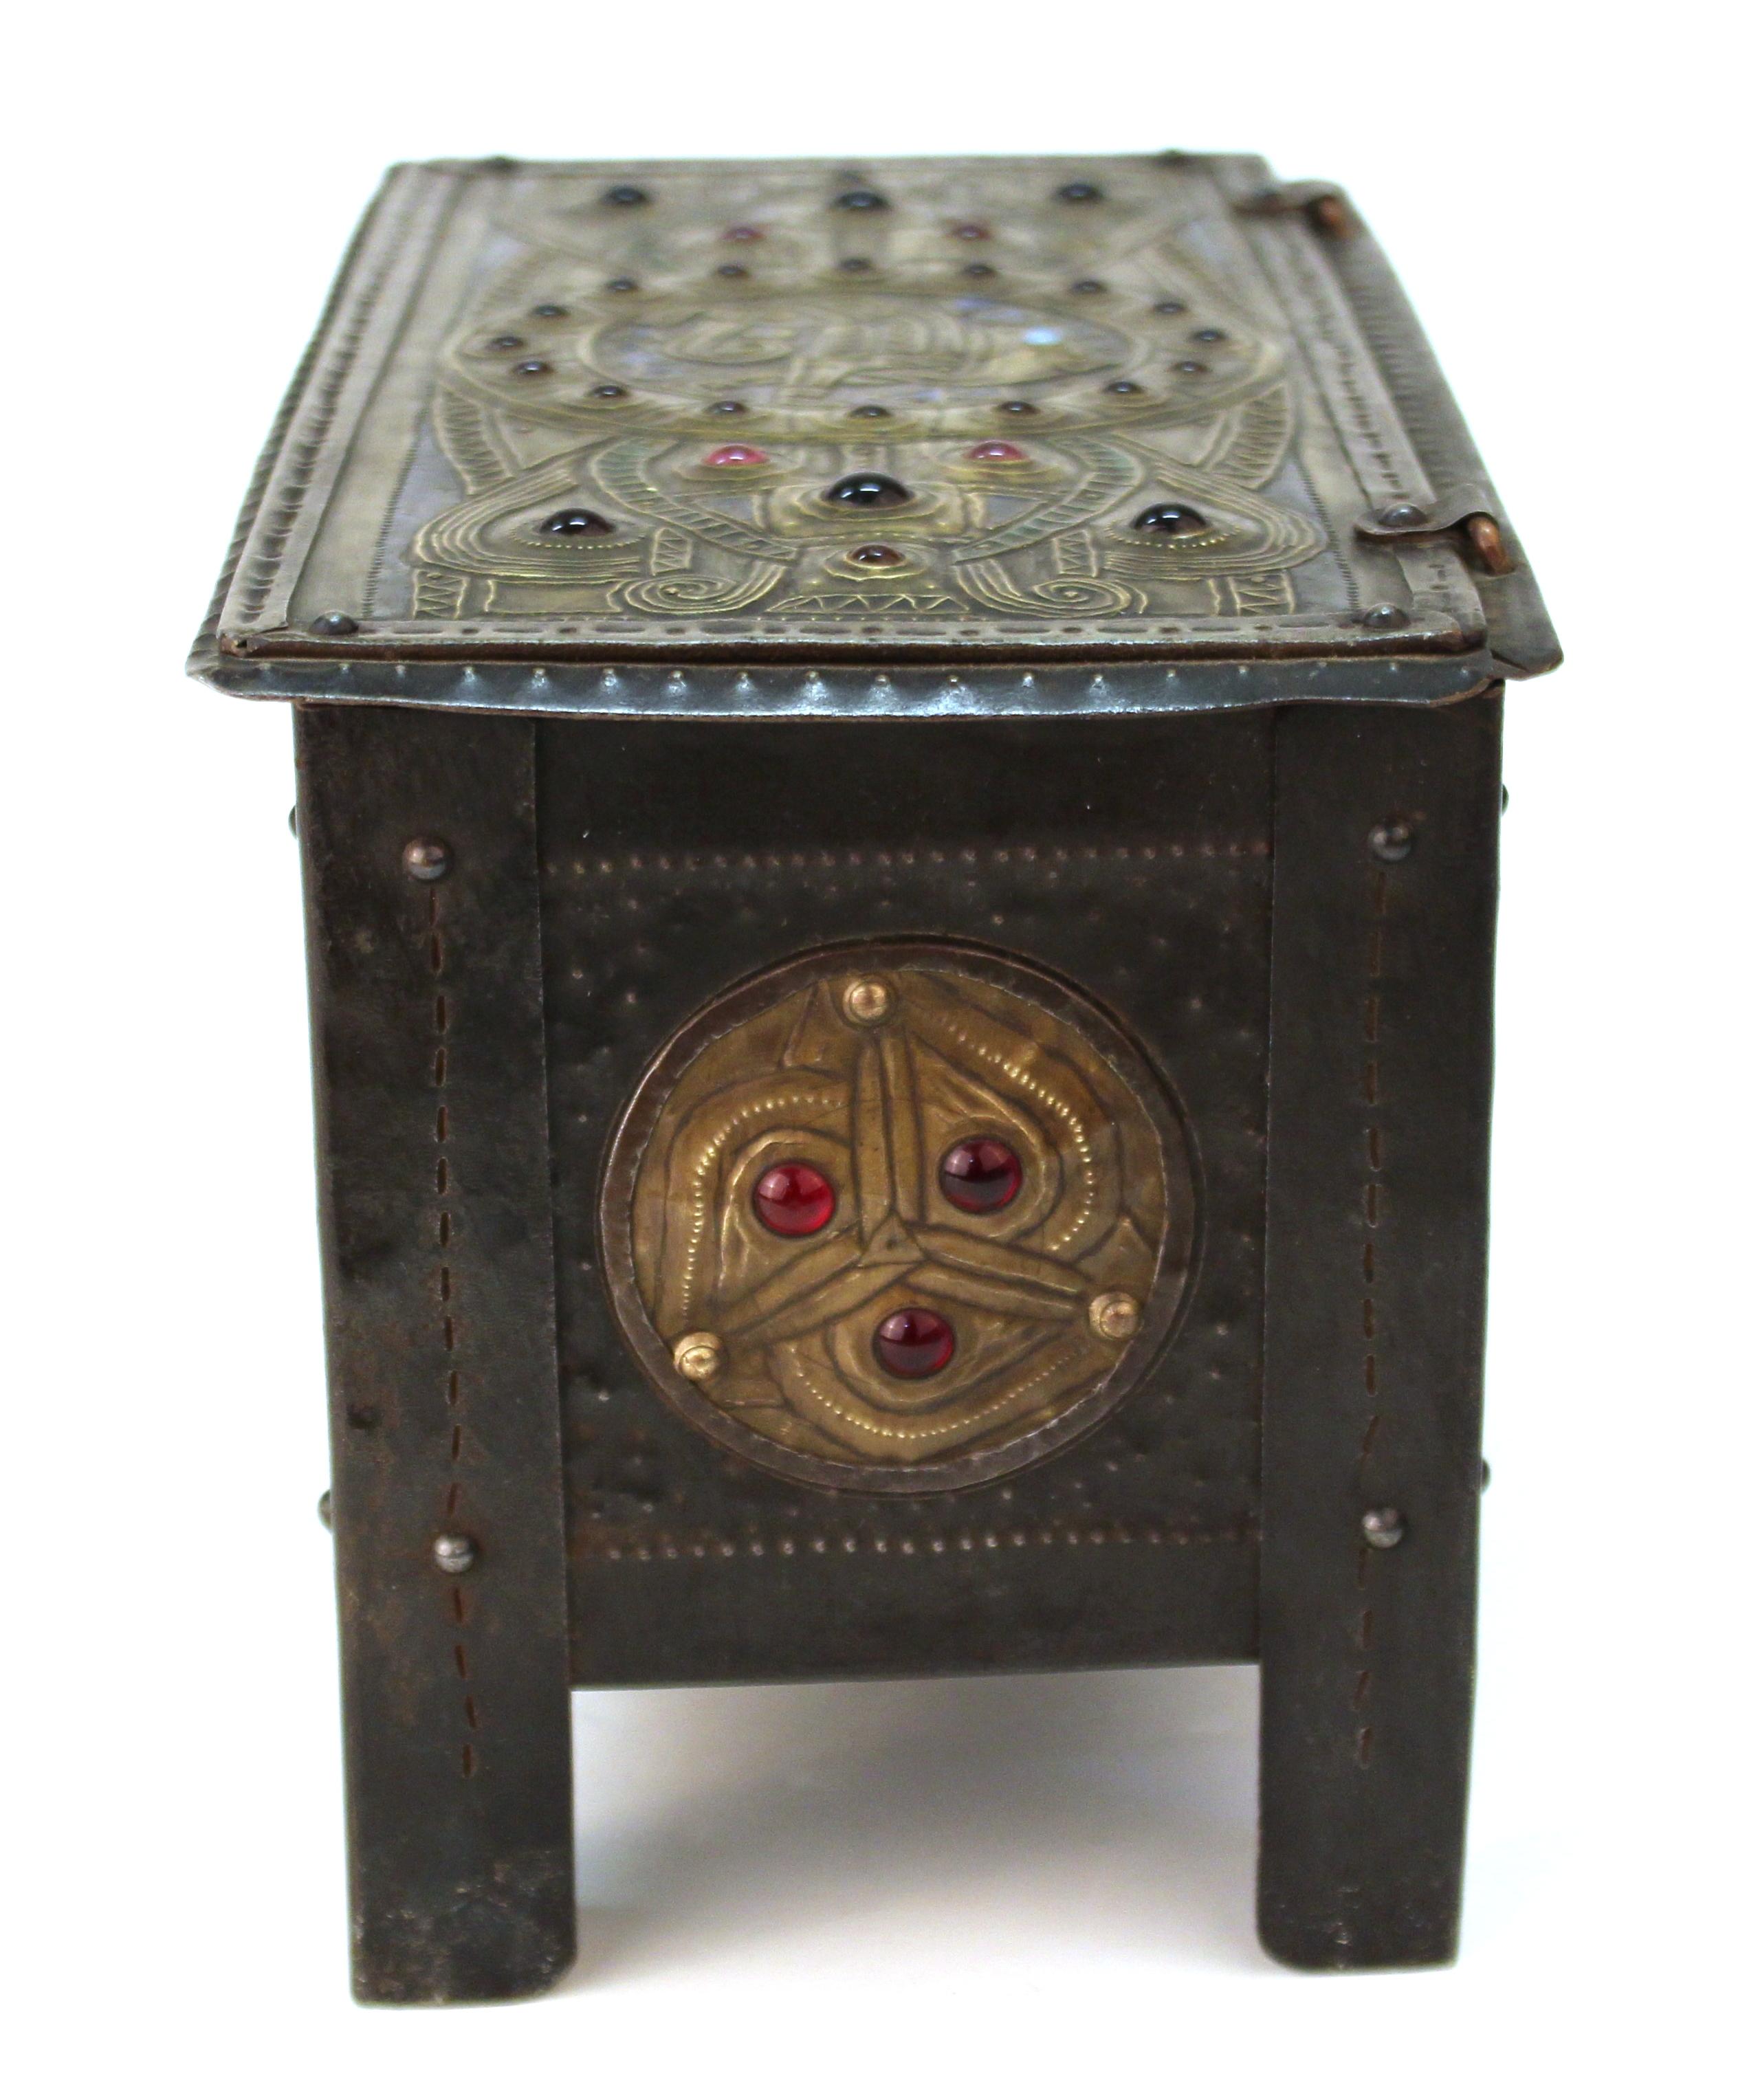 Early 20th Century Alfred Daguet French Art Nouveau Jeweled Metal Repousse Box For Sale